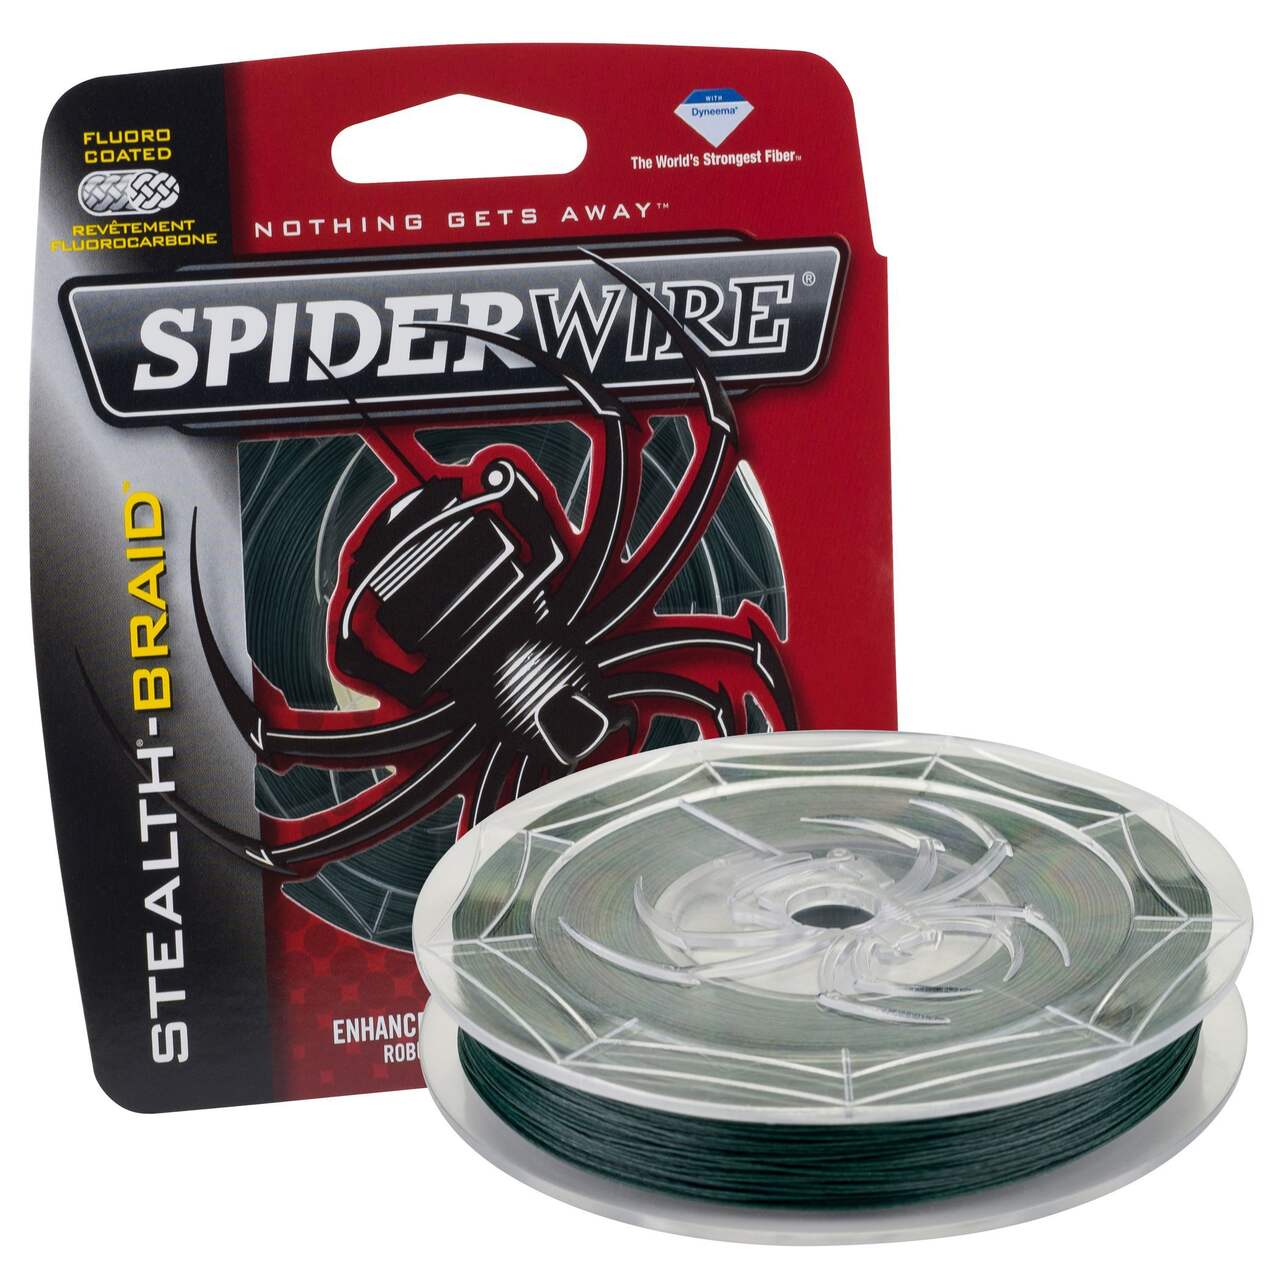 Spiderwire Stealth Braided Fishing Line, Green